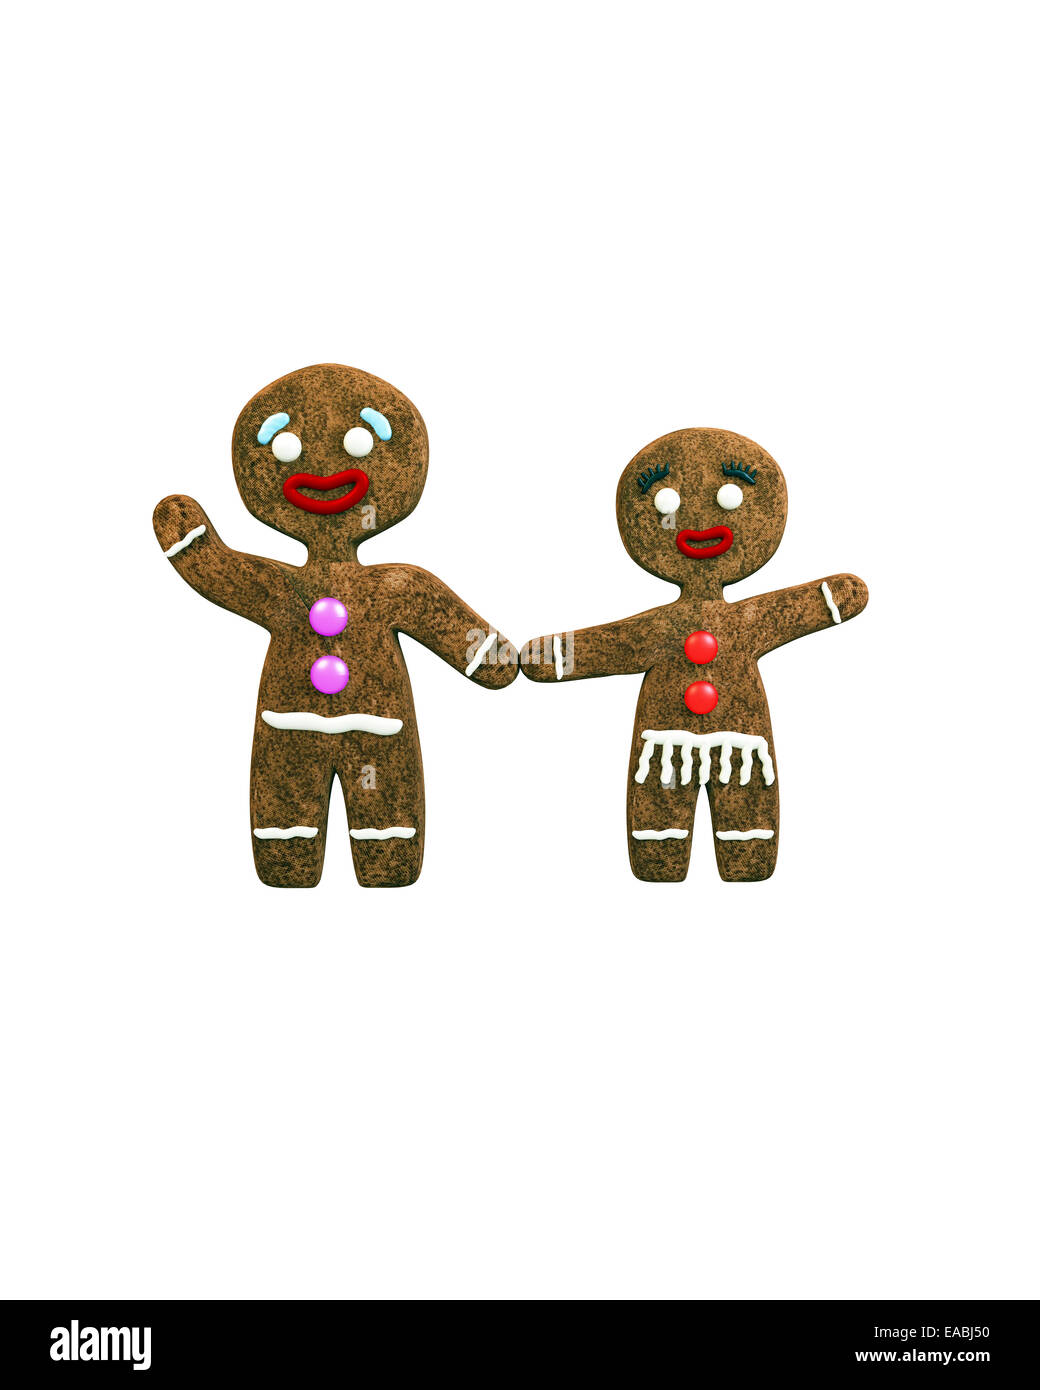 Mrs and mister gingerbread isolated on white background Stock Photo